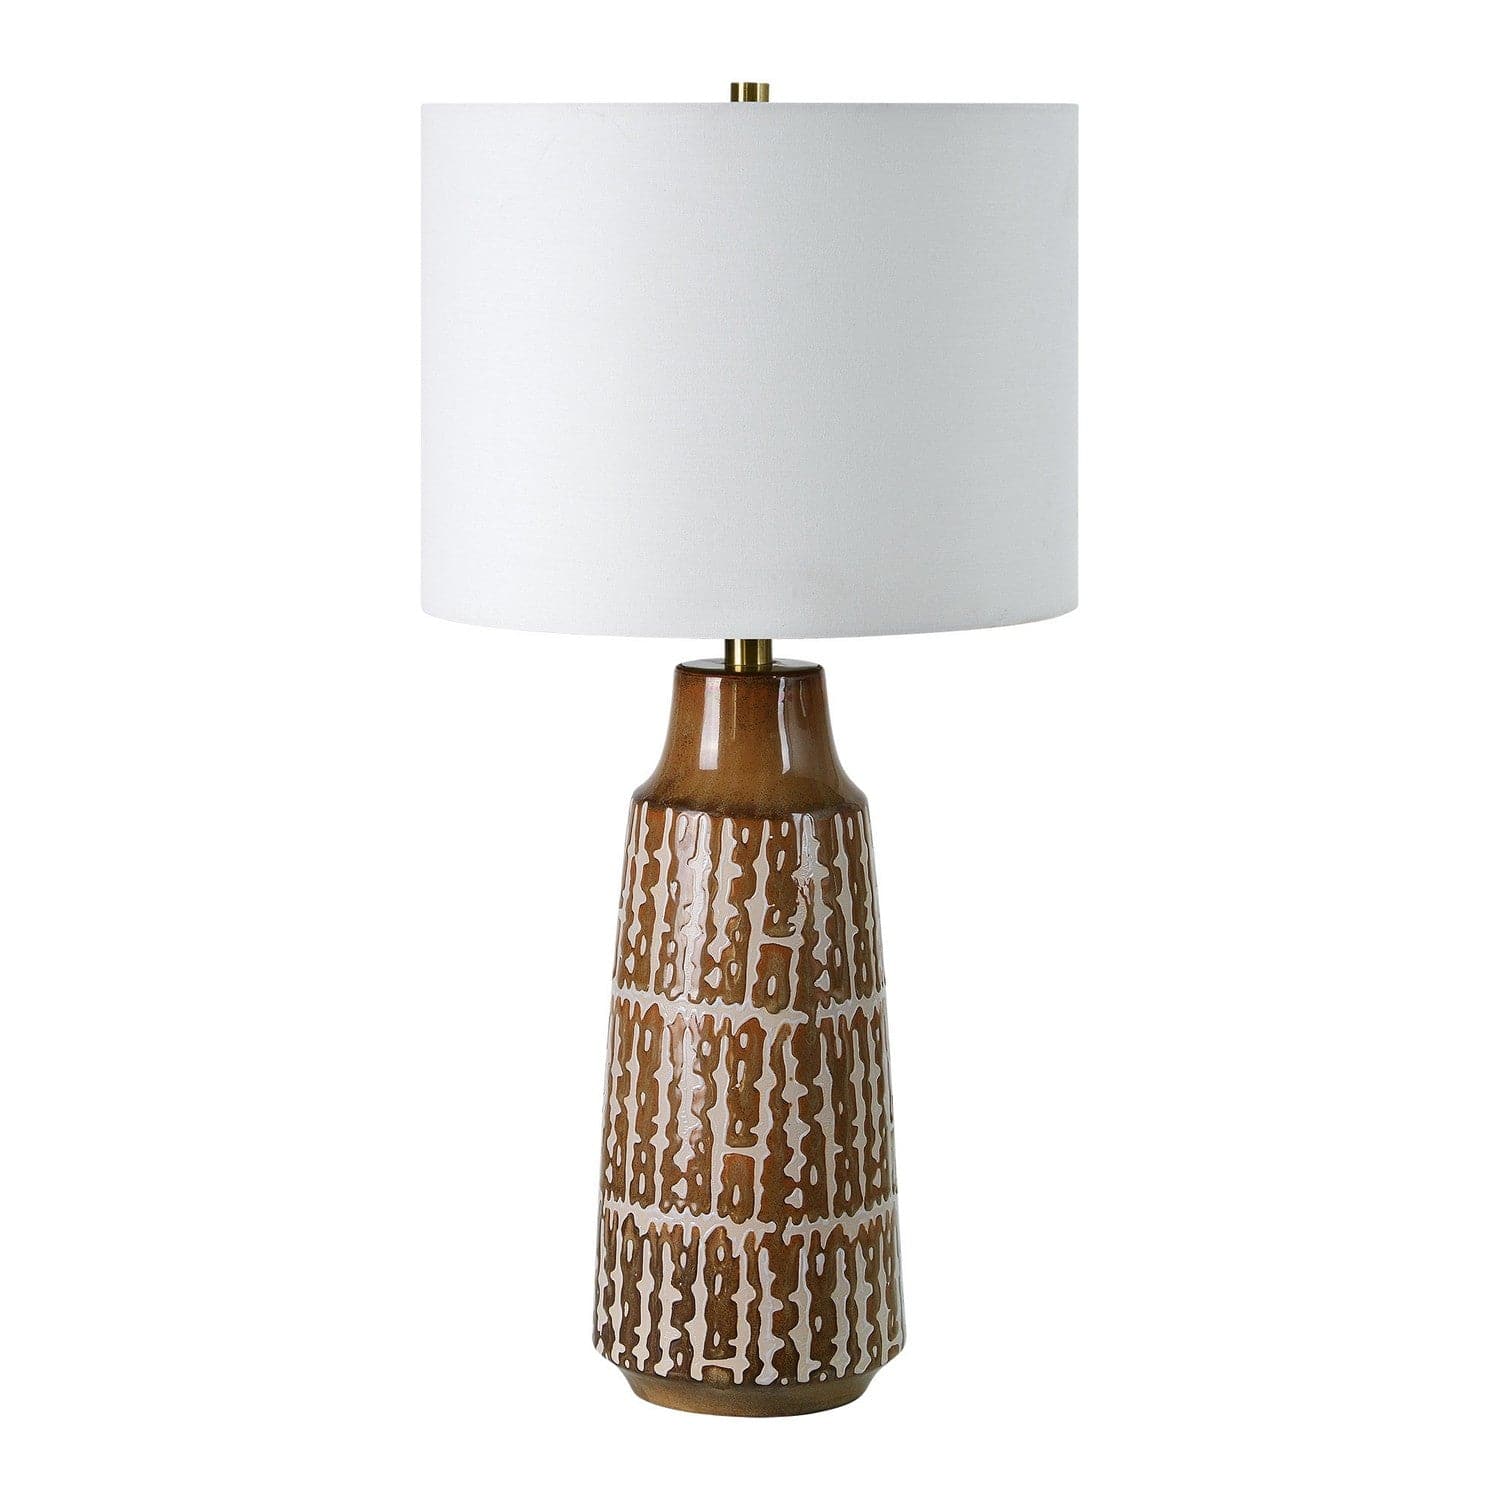 Renwil - LPT1225 - One Light Table Lamp - Tereva - Taupe